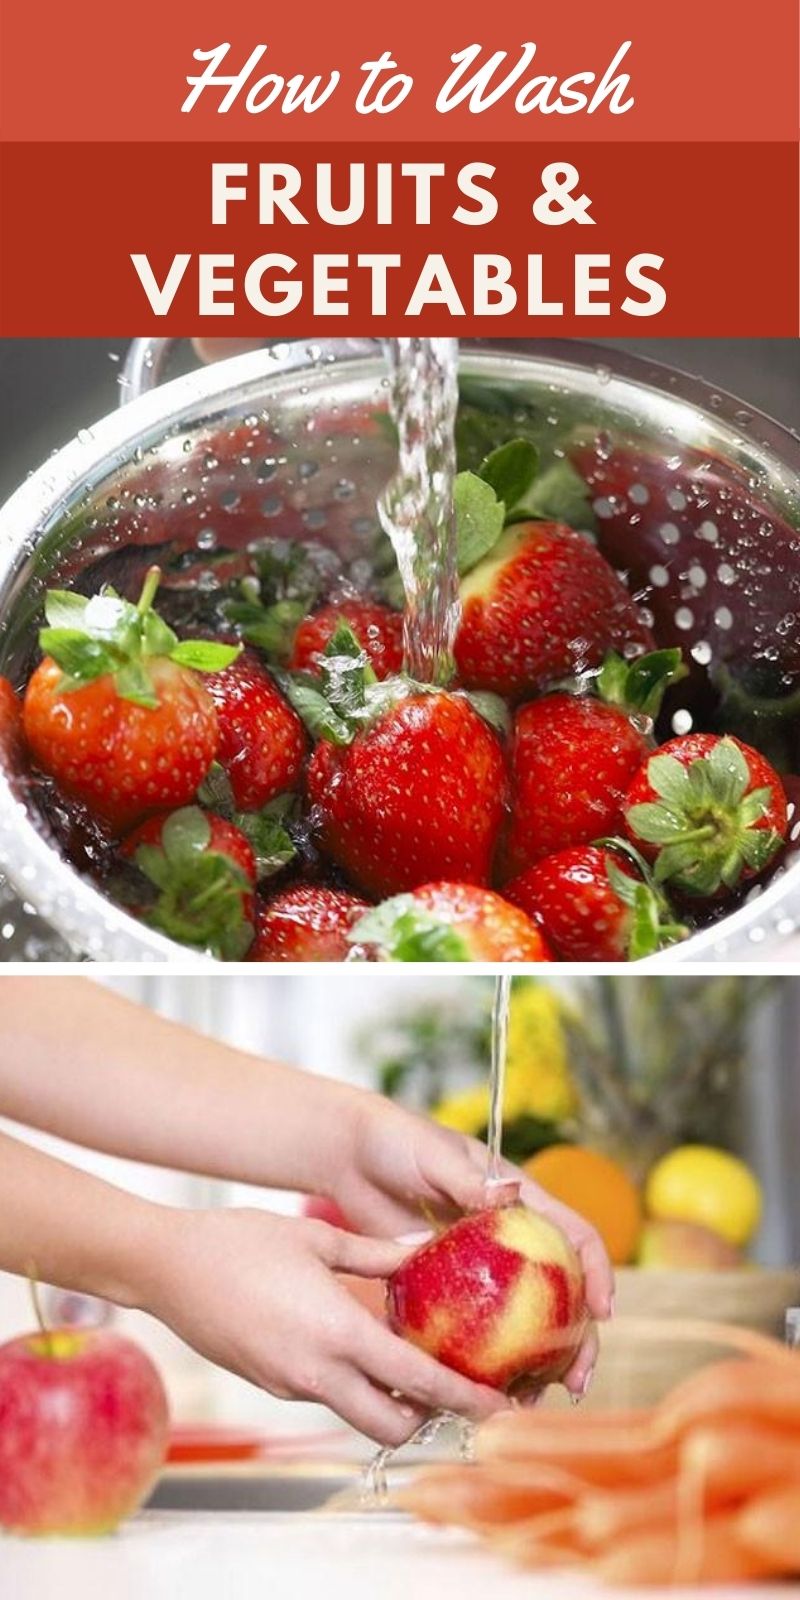 Wash Fruits and Vegetables